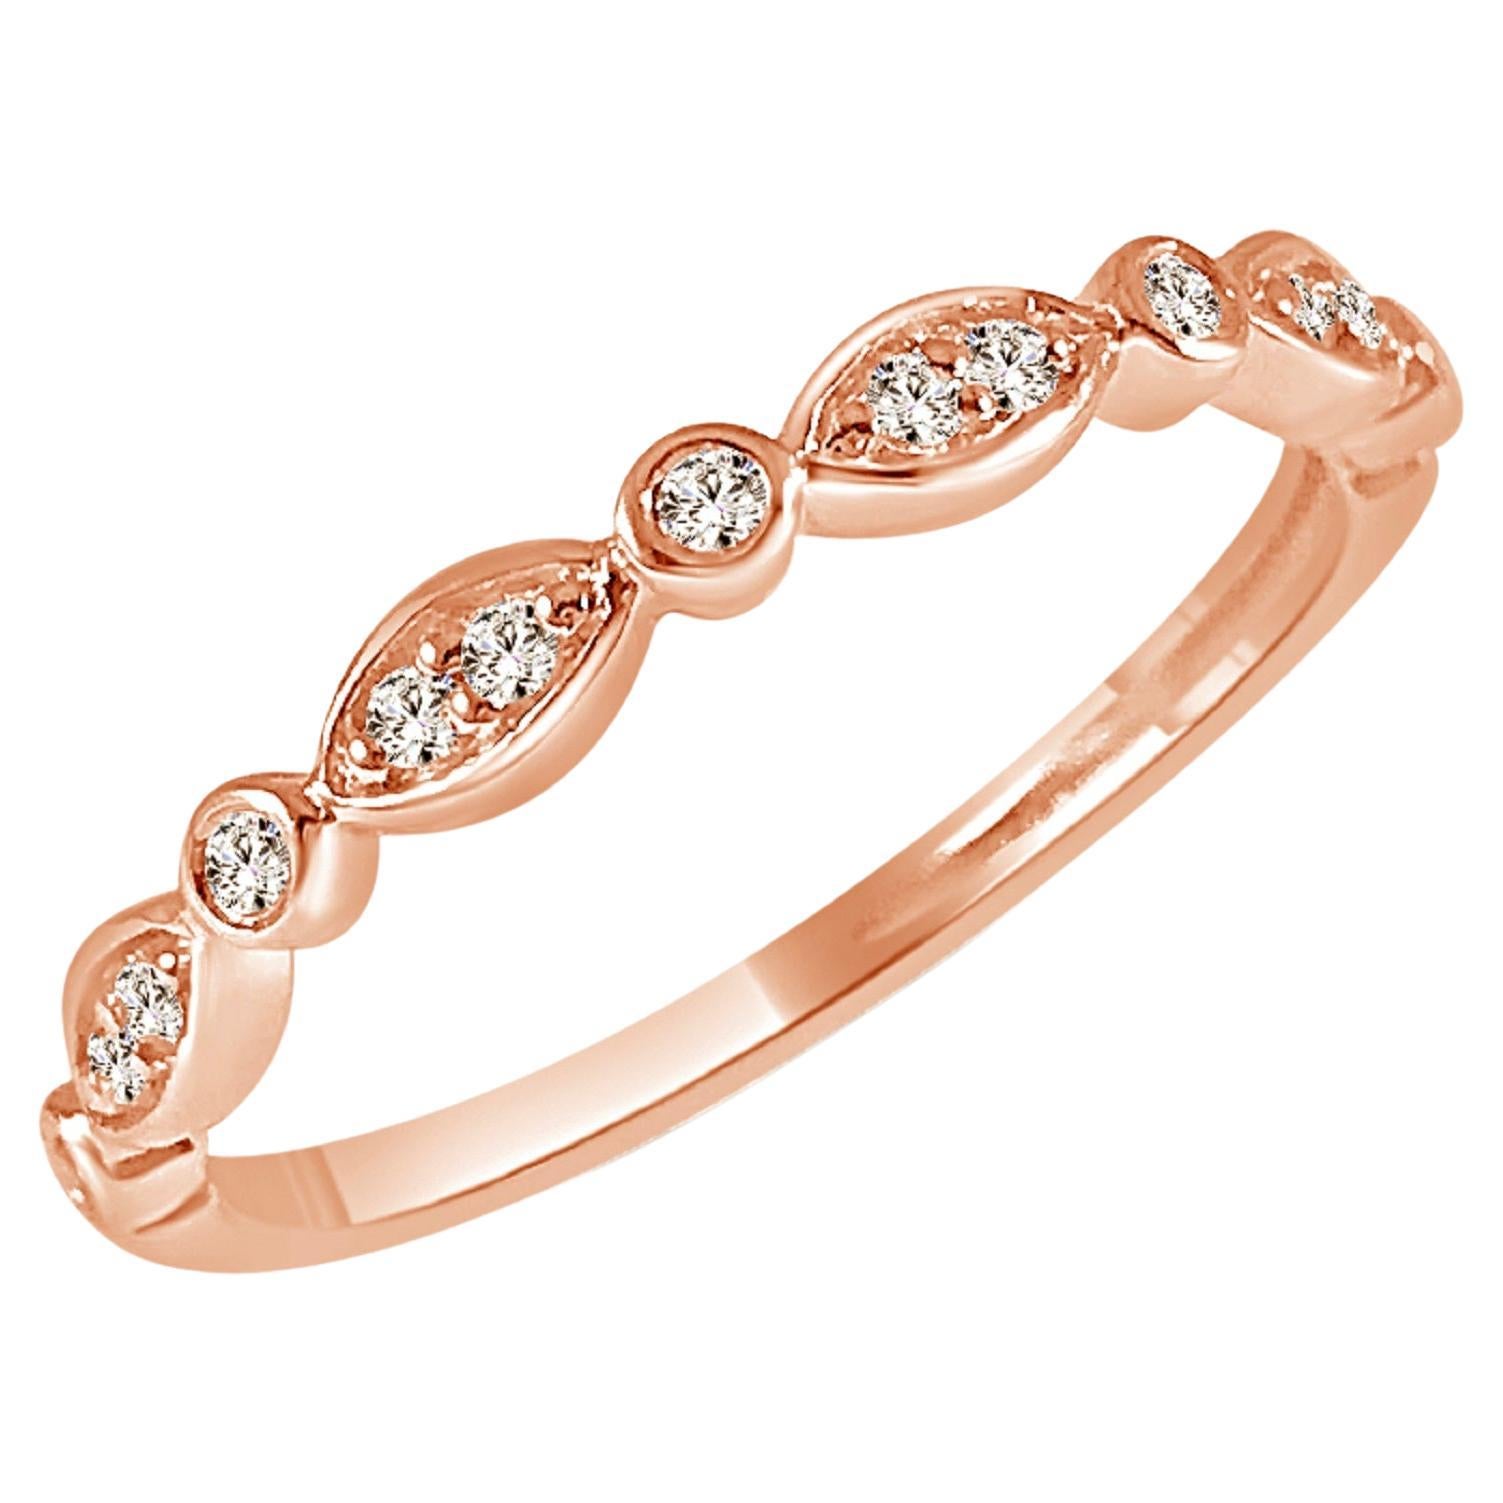 14K Rose Gold 0.10ct Diamond Band for Her For Sale